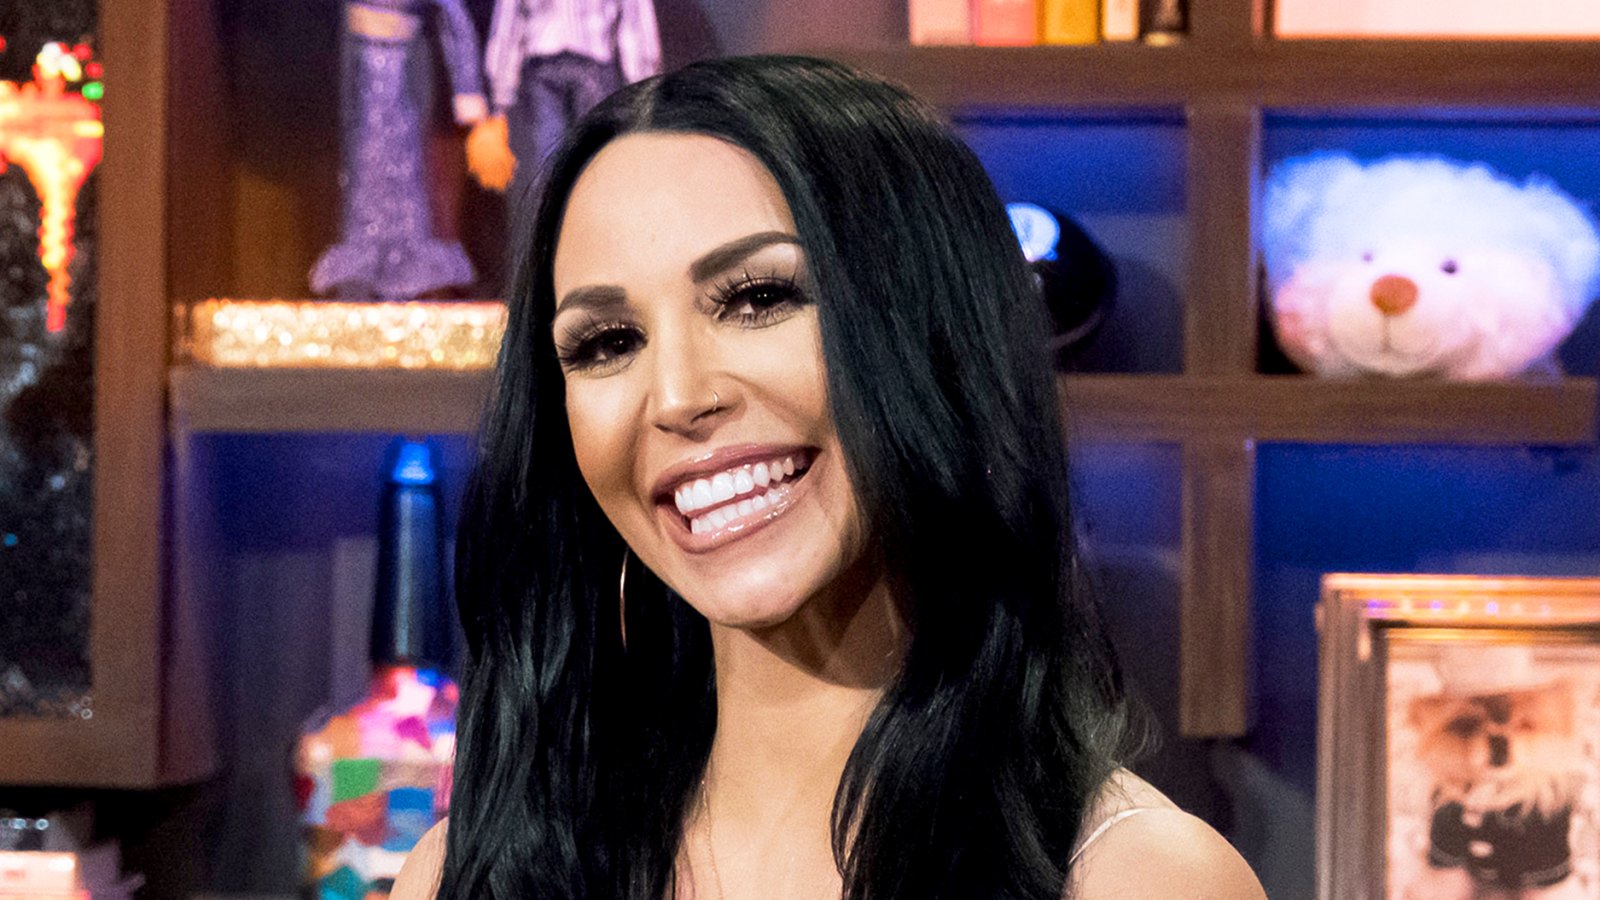 Scheana Shay on ‘Watch What Happens Live‘